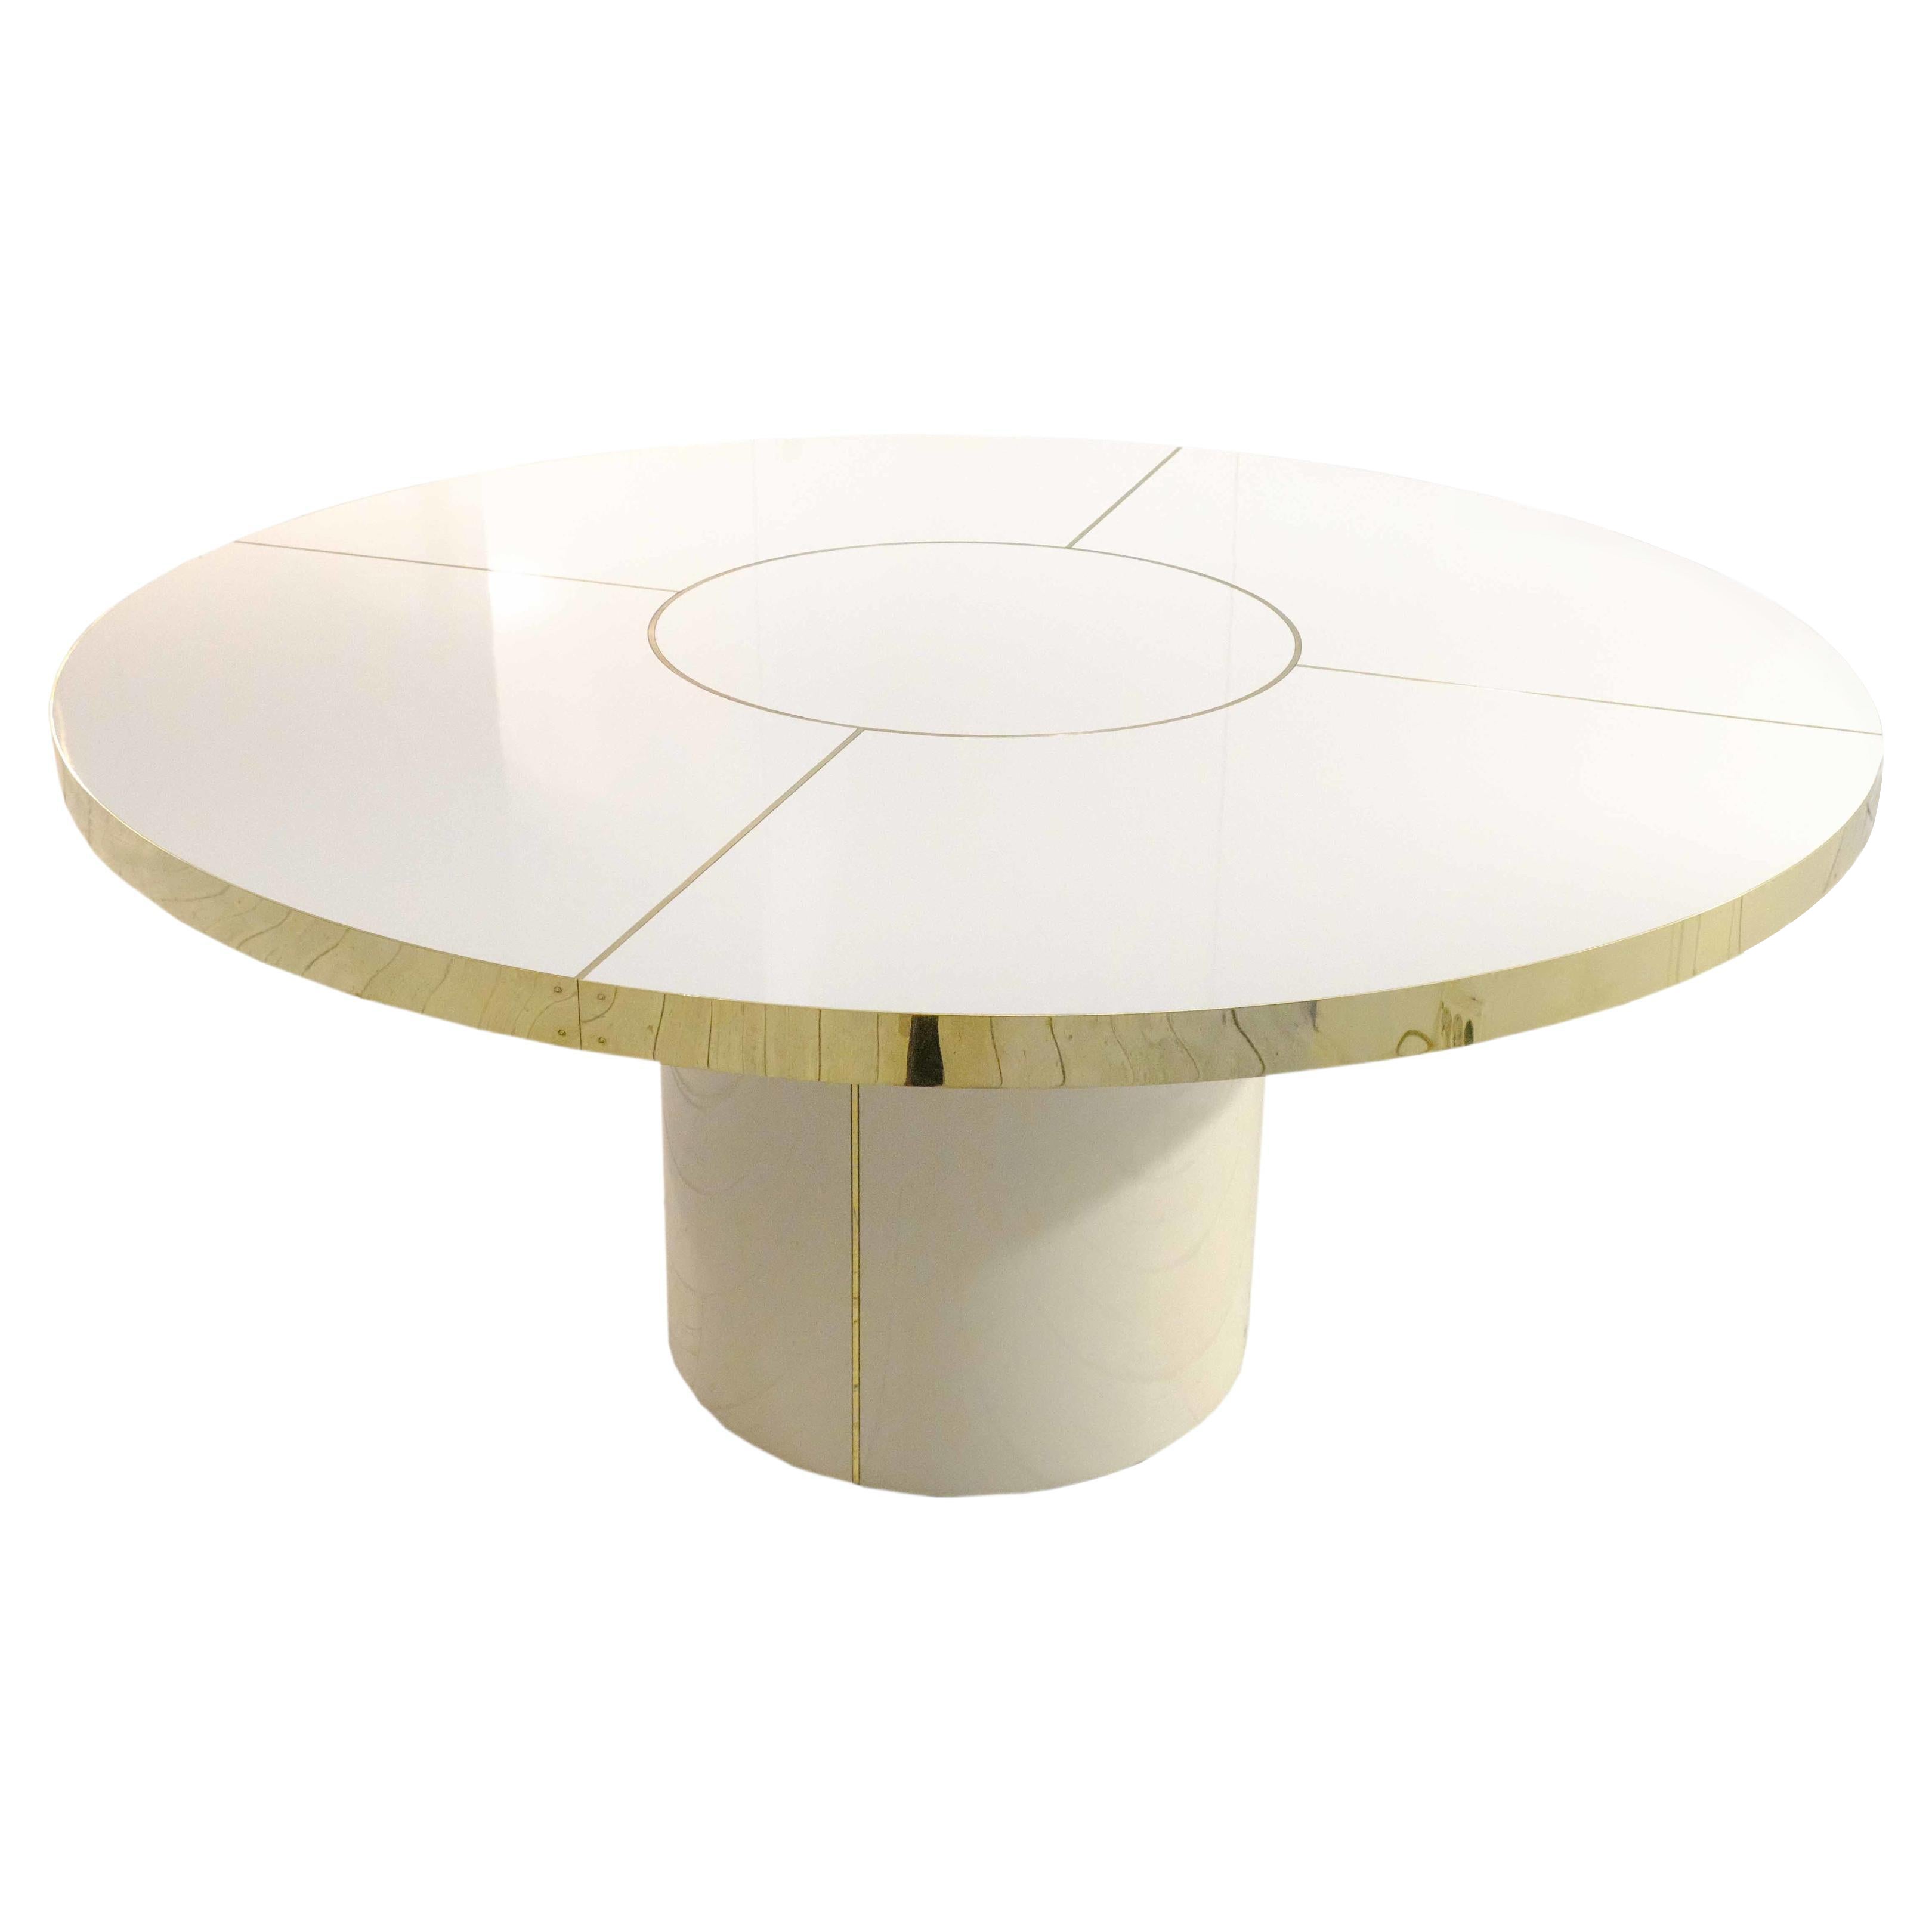 Retro Design Round Dining Table Palm Springs Style High Gloss Laminated&Brass L en vente